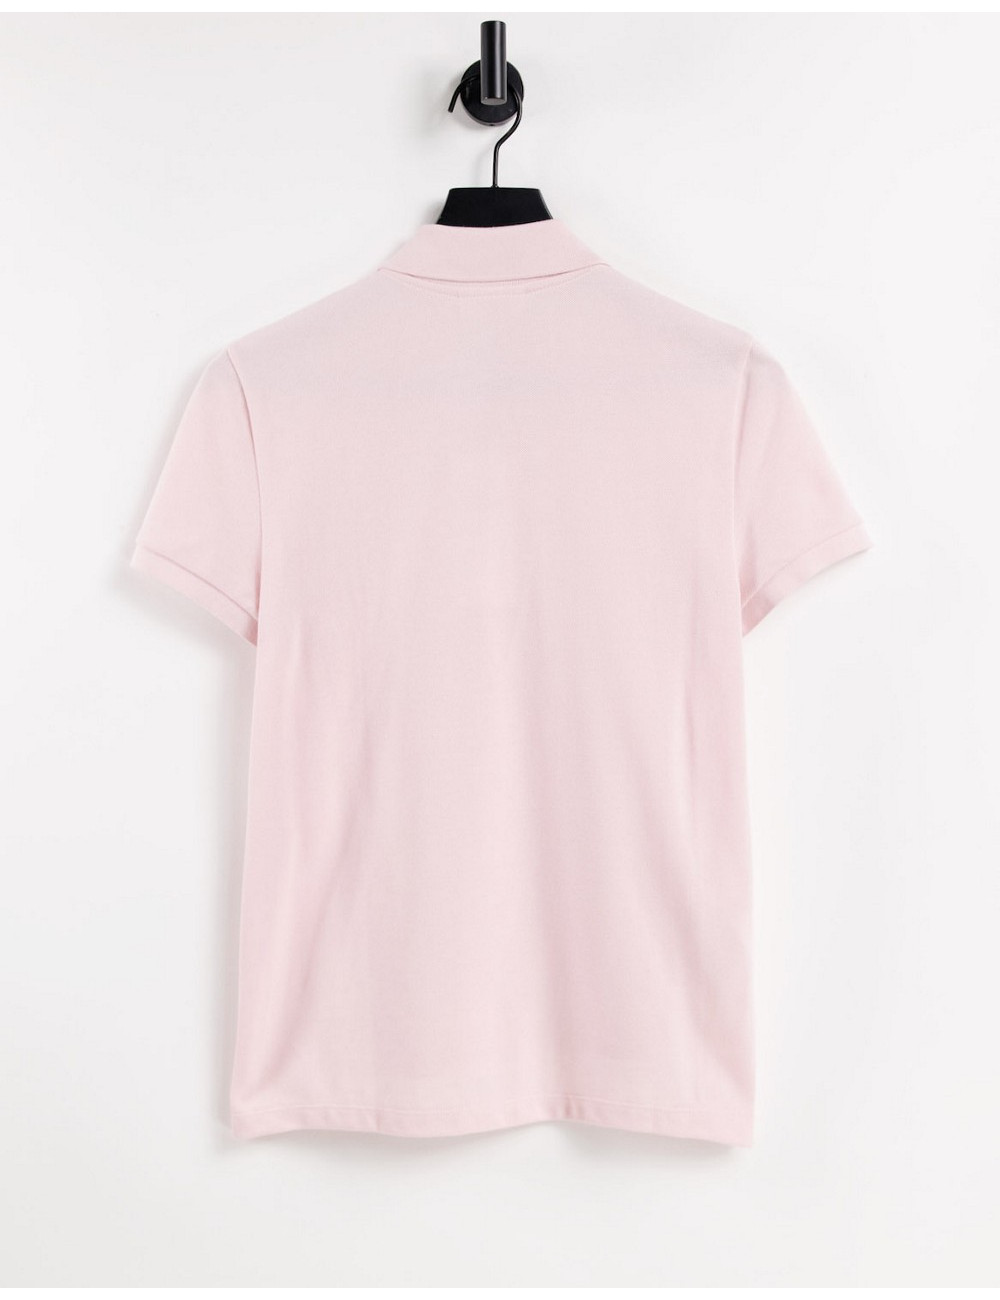 Lacoste classic polo in pink